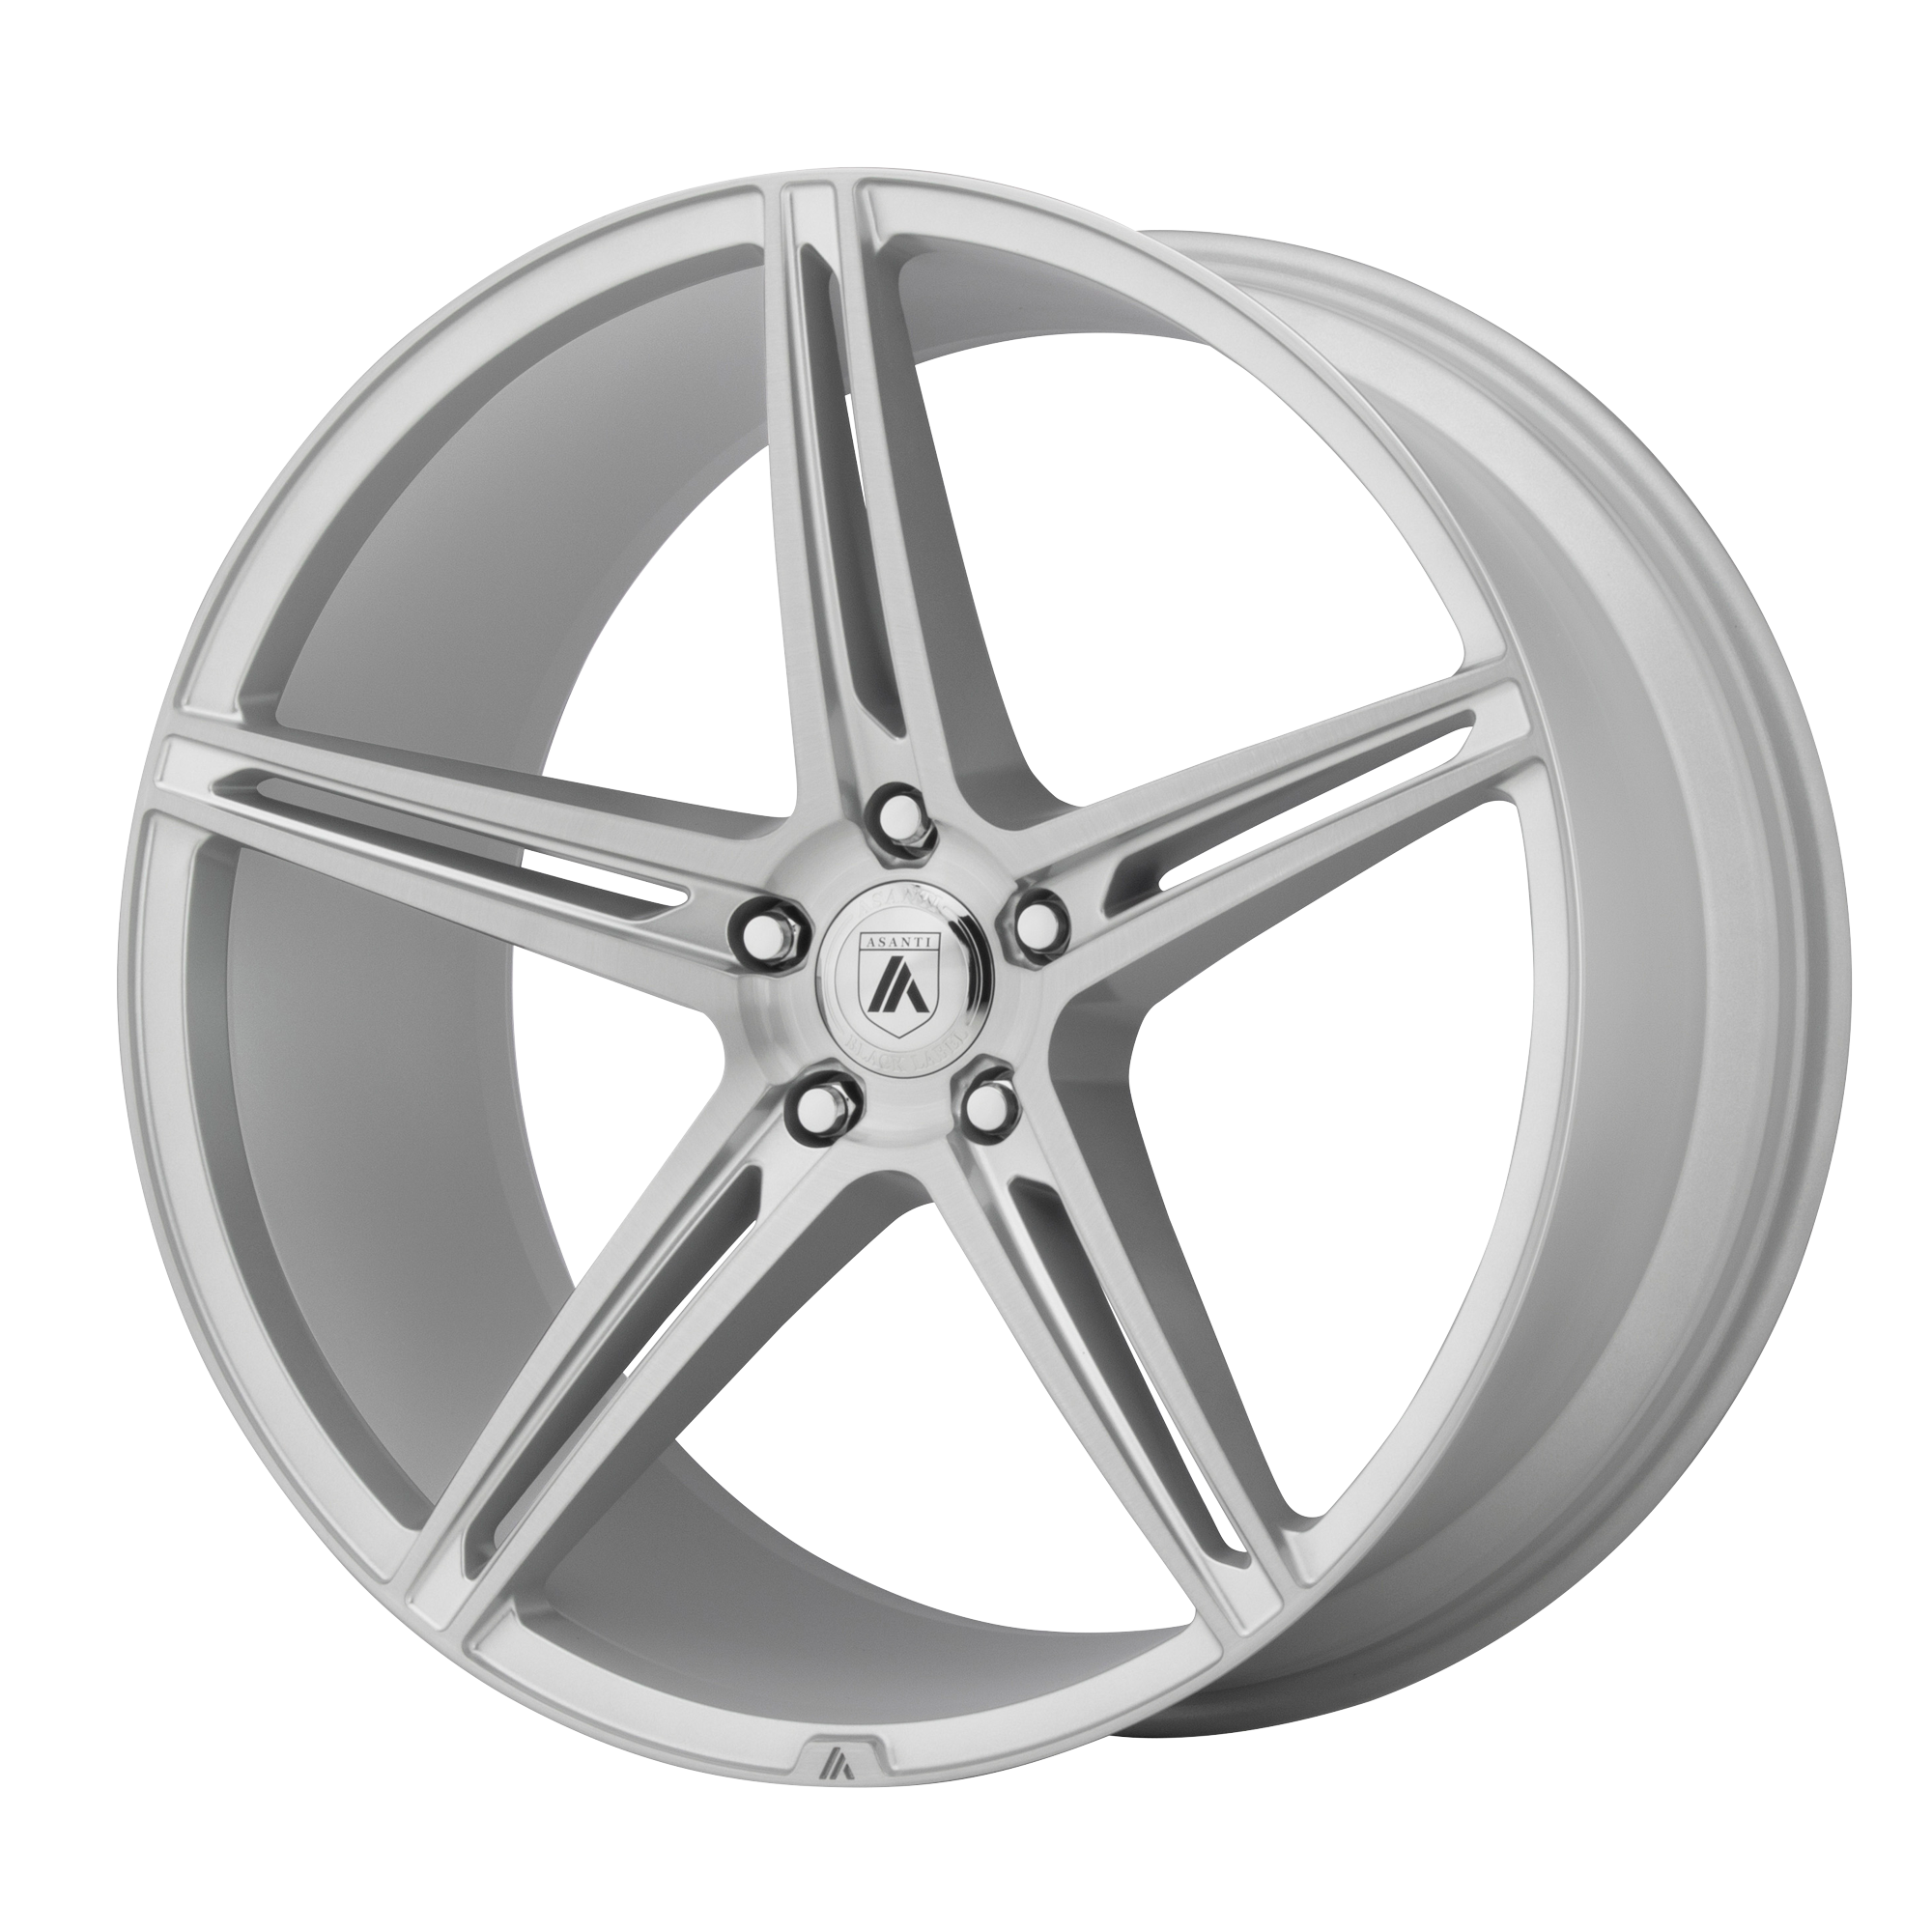 ALPHA 5 20x10.5 5x112.00 BRUSHED SILVER (38 mm) - Tires and Engine Performance